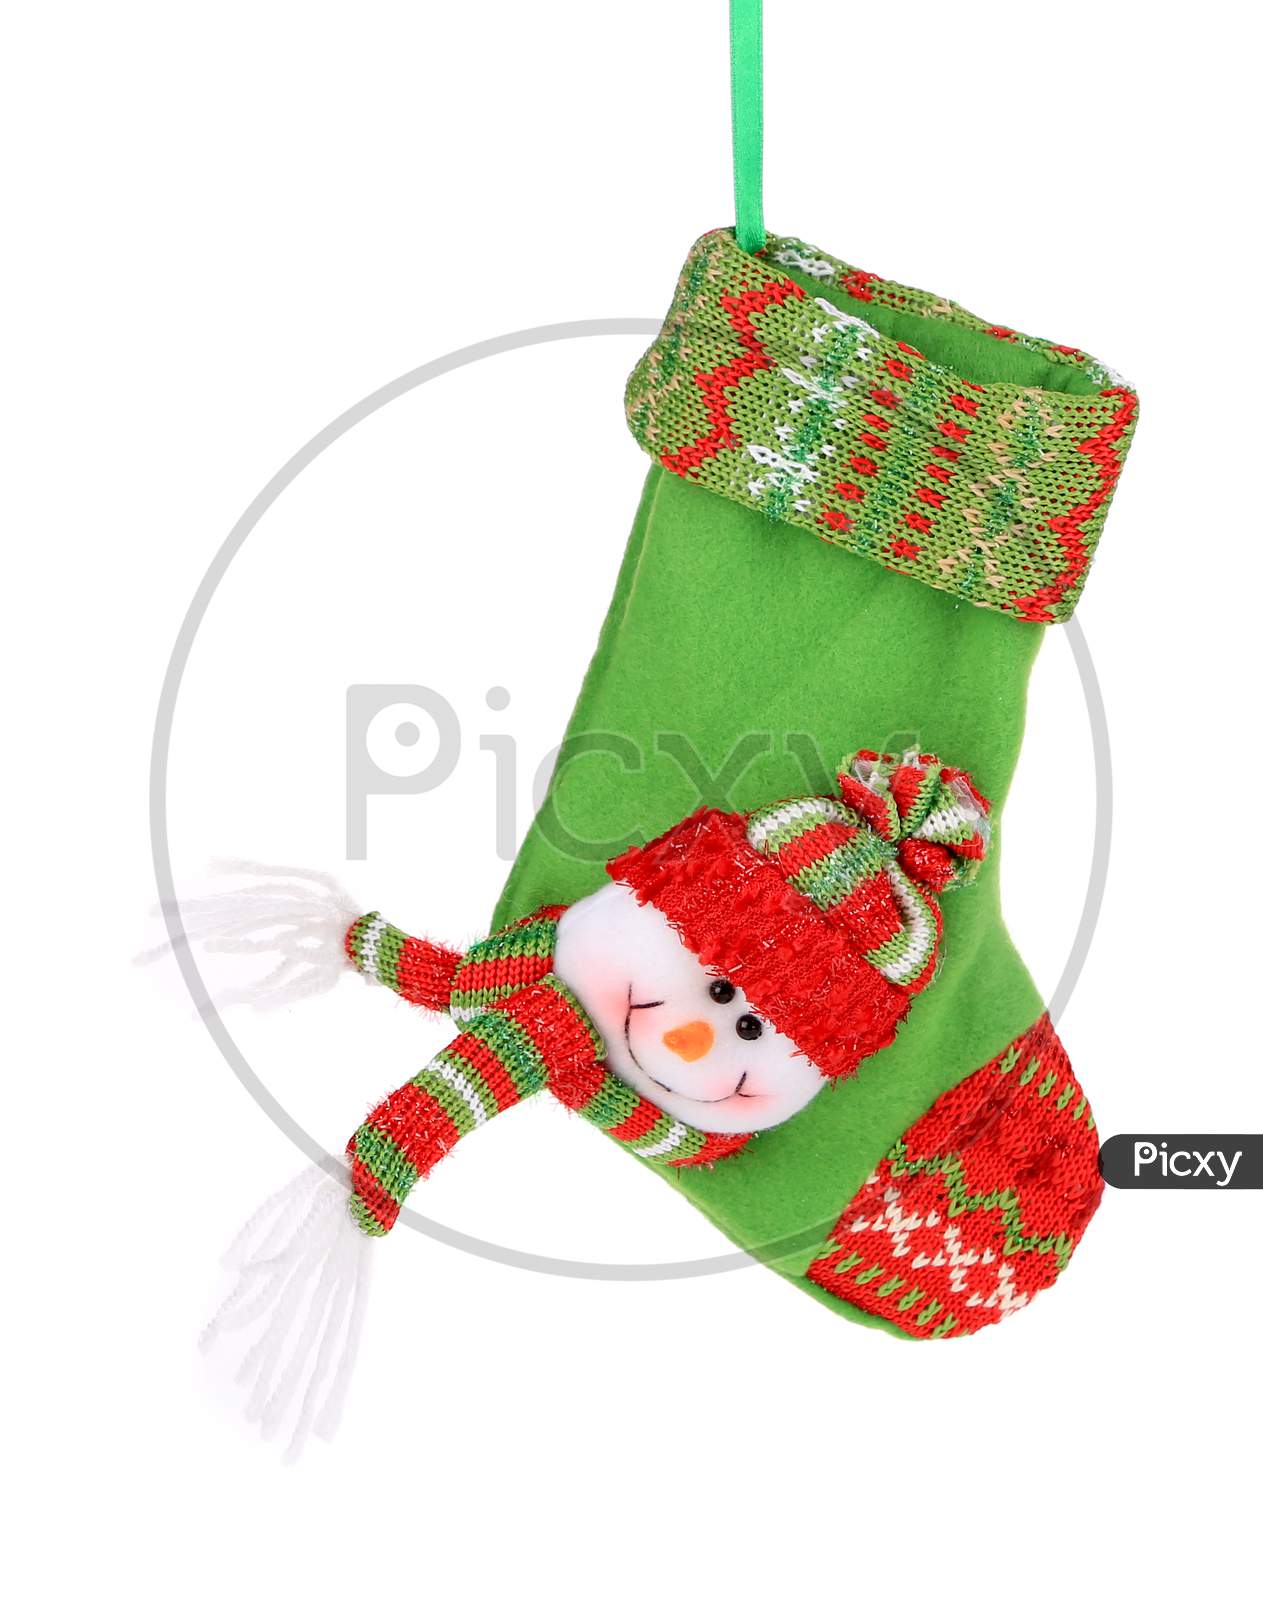 Christmas Green Sock With Snowman. Isolated On A White Background.